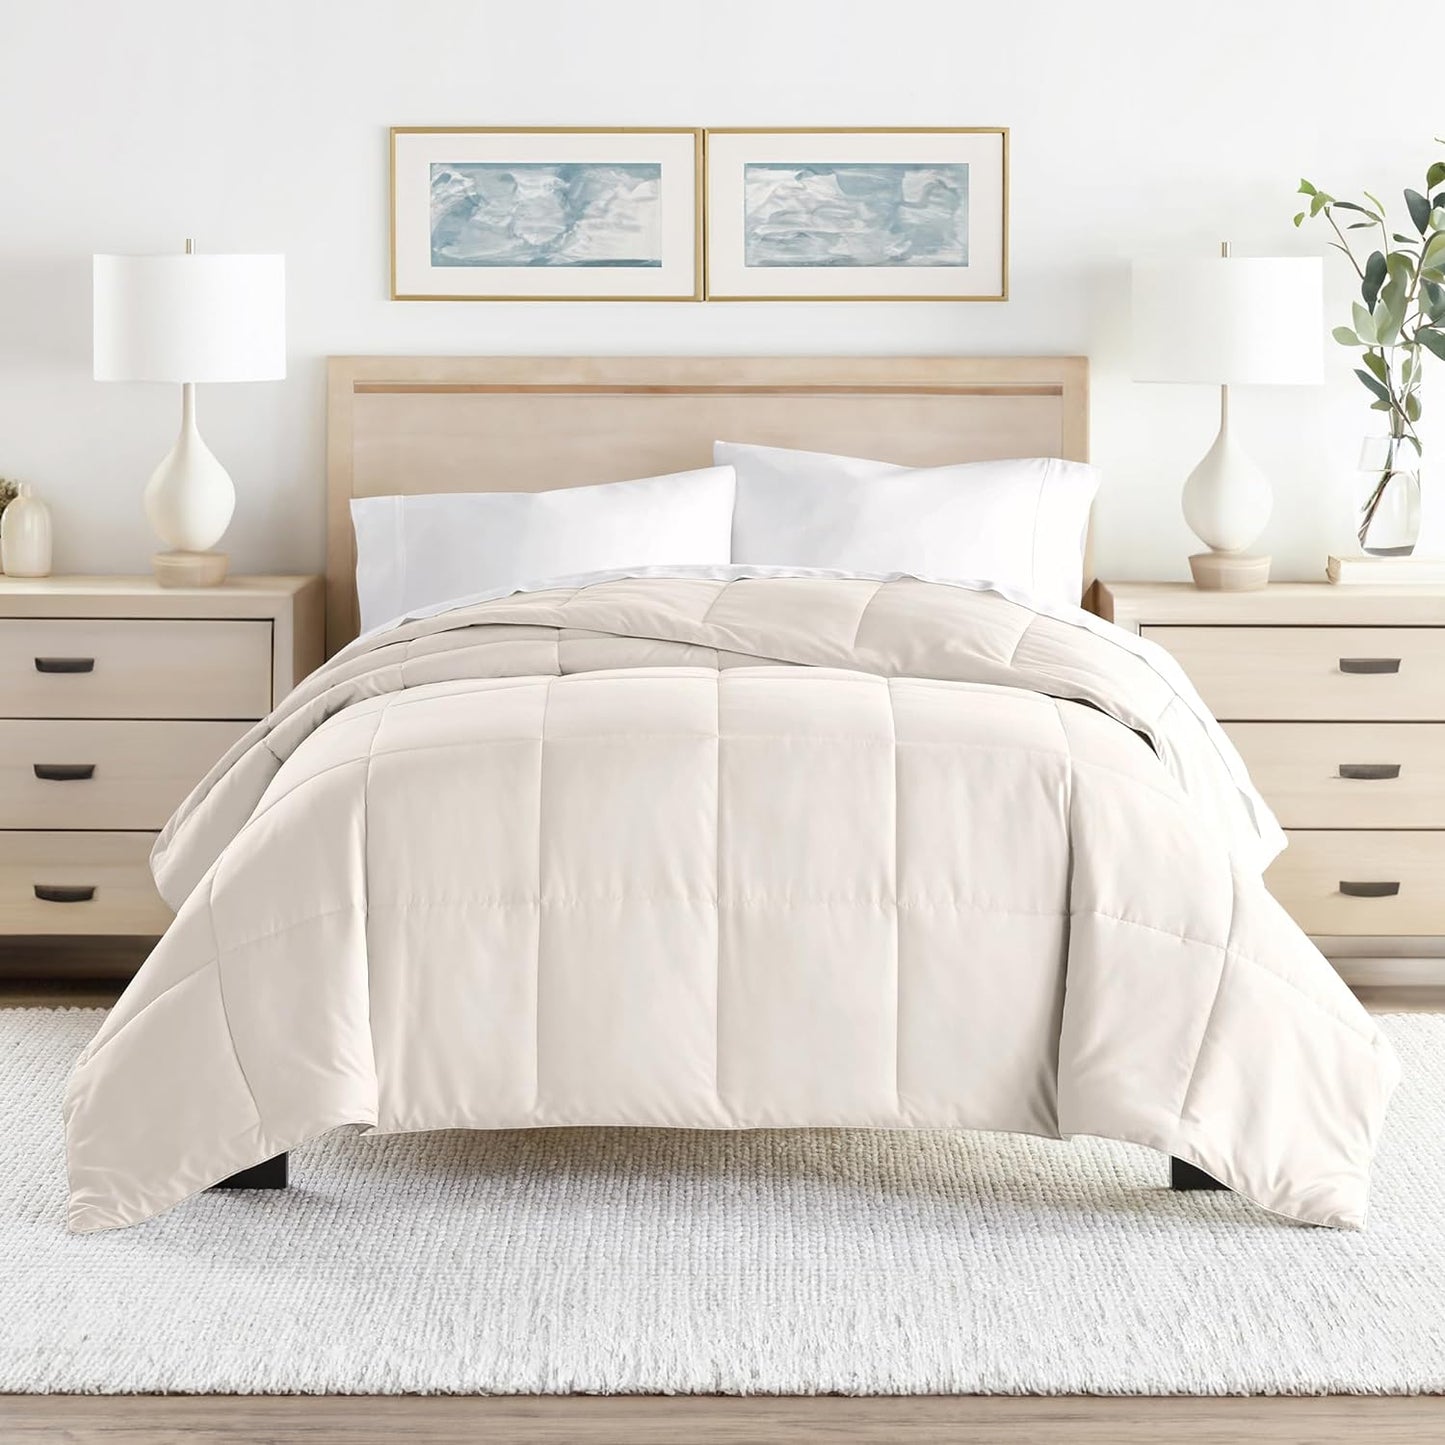 Linen Market Queen Comforter (1 Piece - Ivory) - Bring Luxury Home with Our Soft and Lightweight Down Alternative Comforters Queen Size - Can Also fit as Comforter Full Size